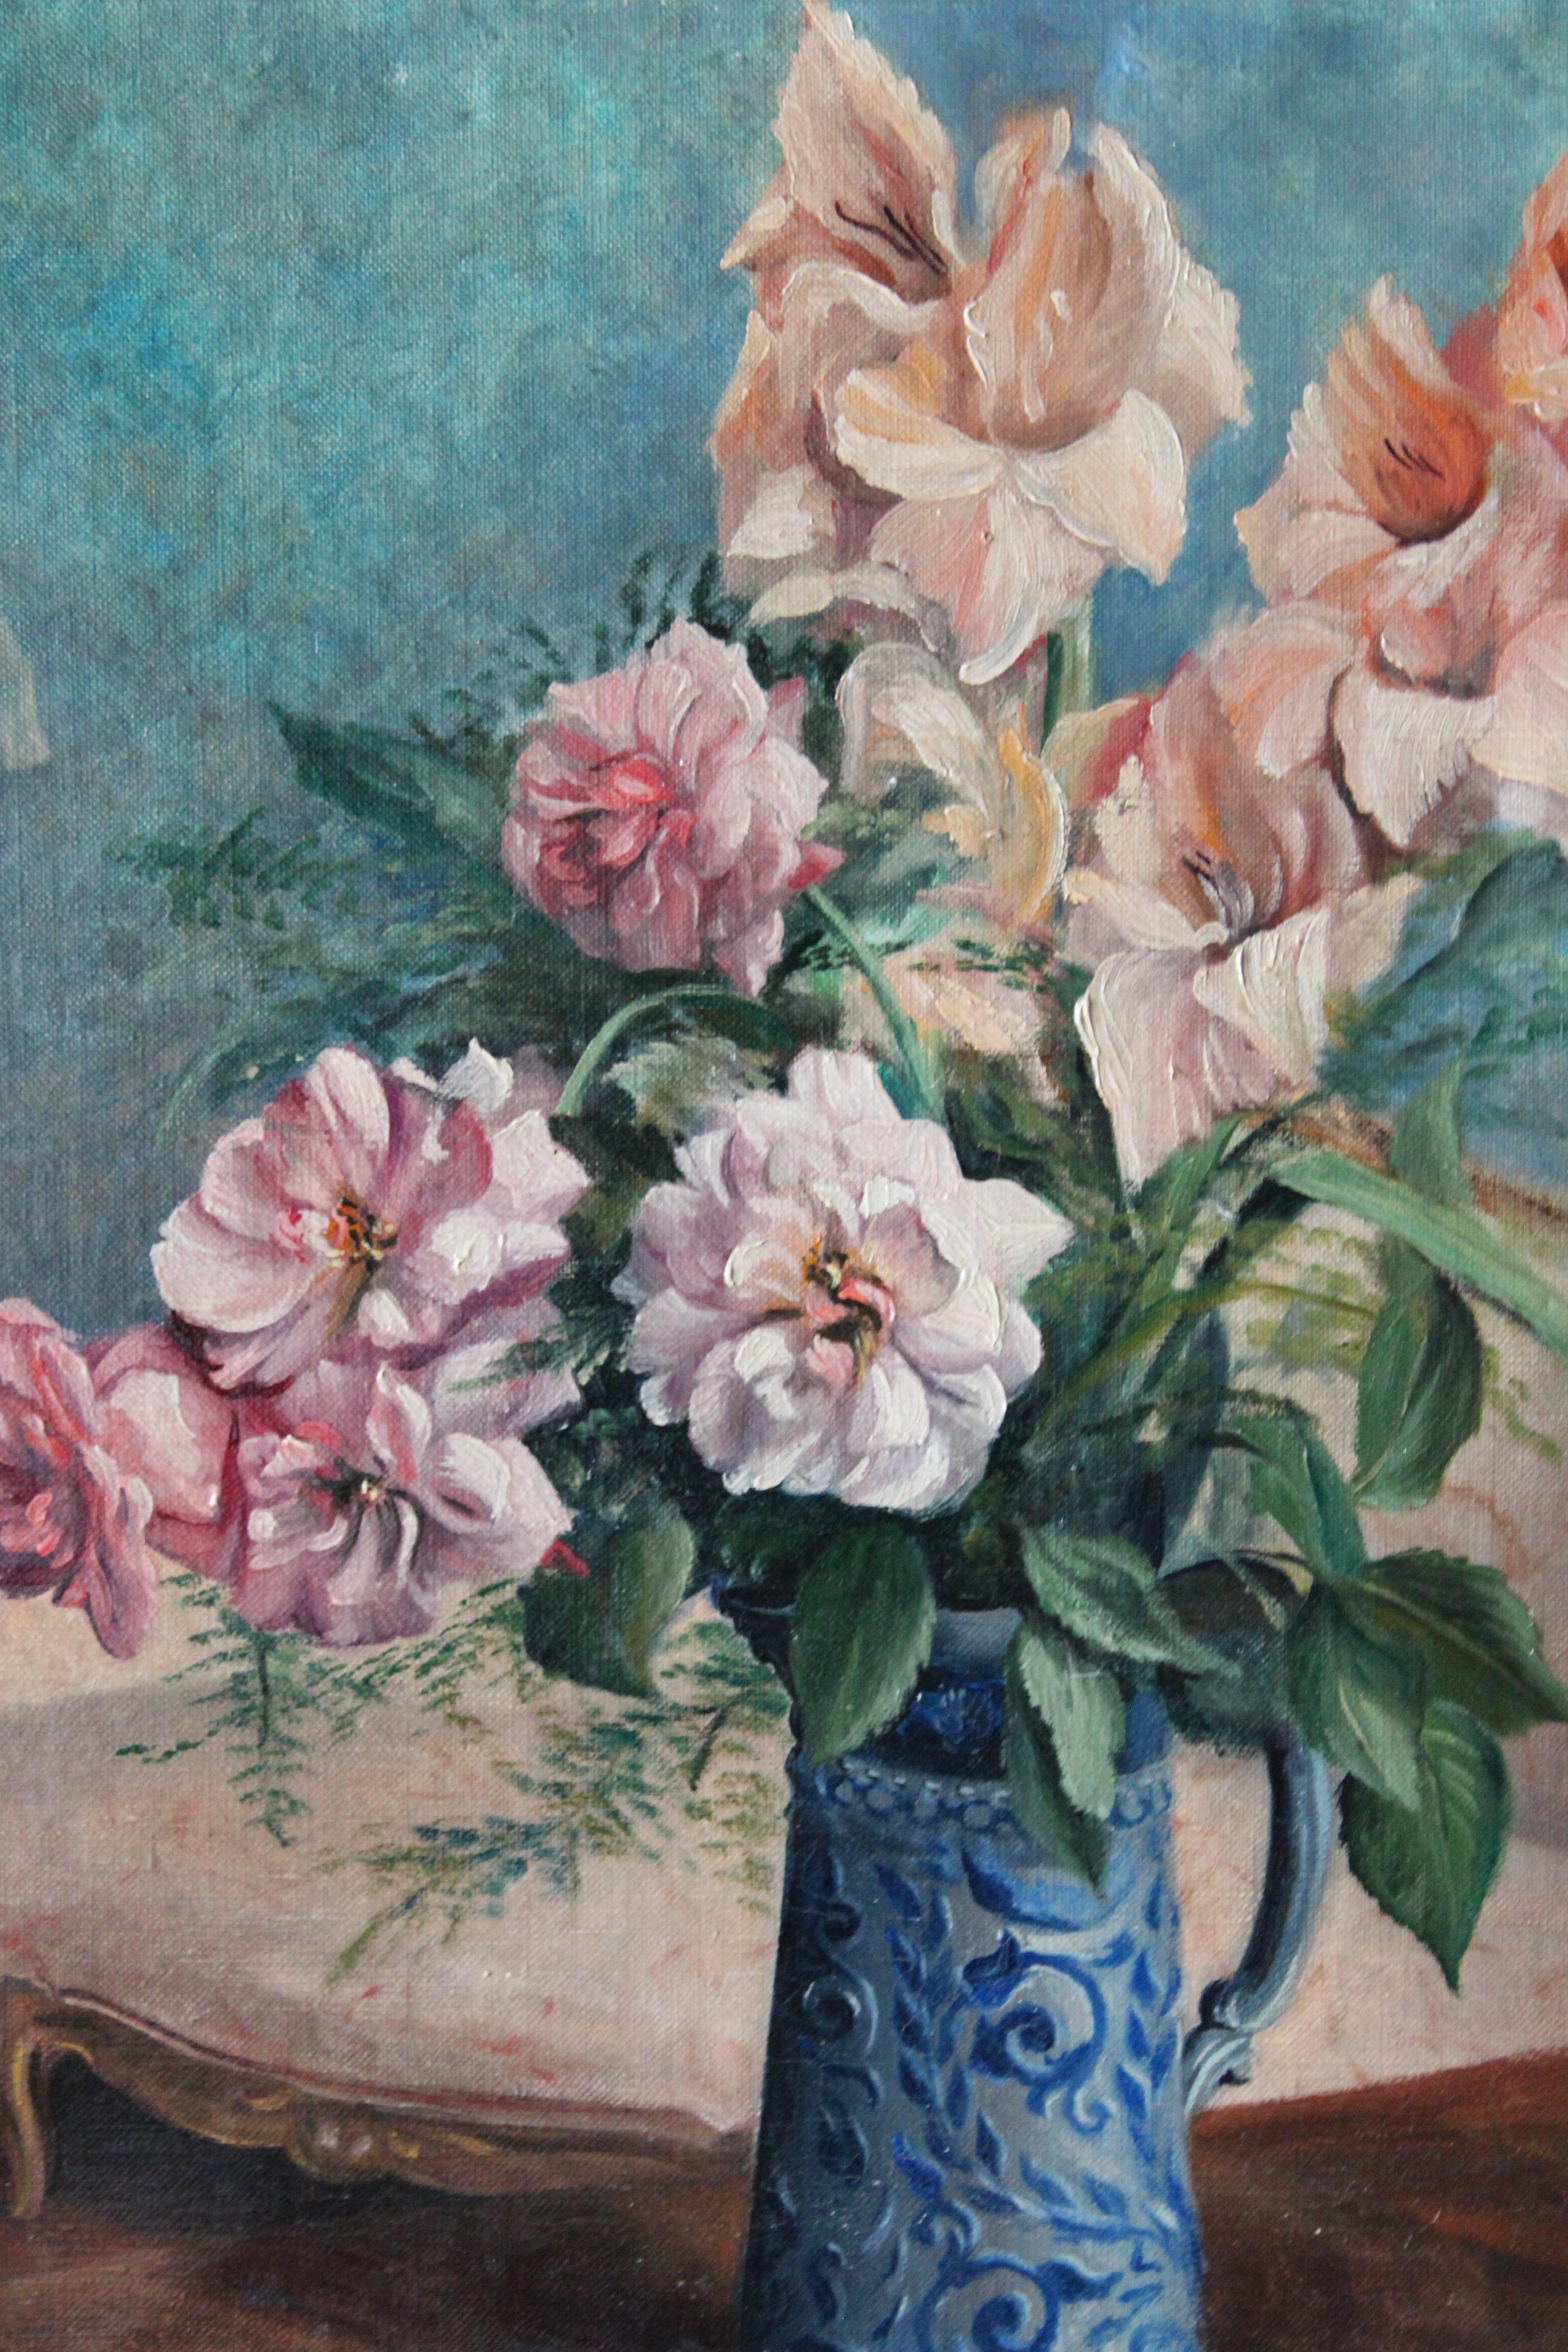 Unknown Still-Life Painting - Vintage still life oil painting, floral interior painting, pink flower bouquet